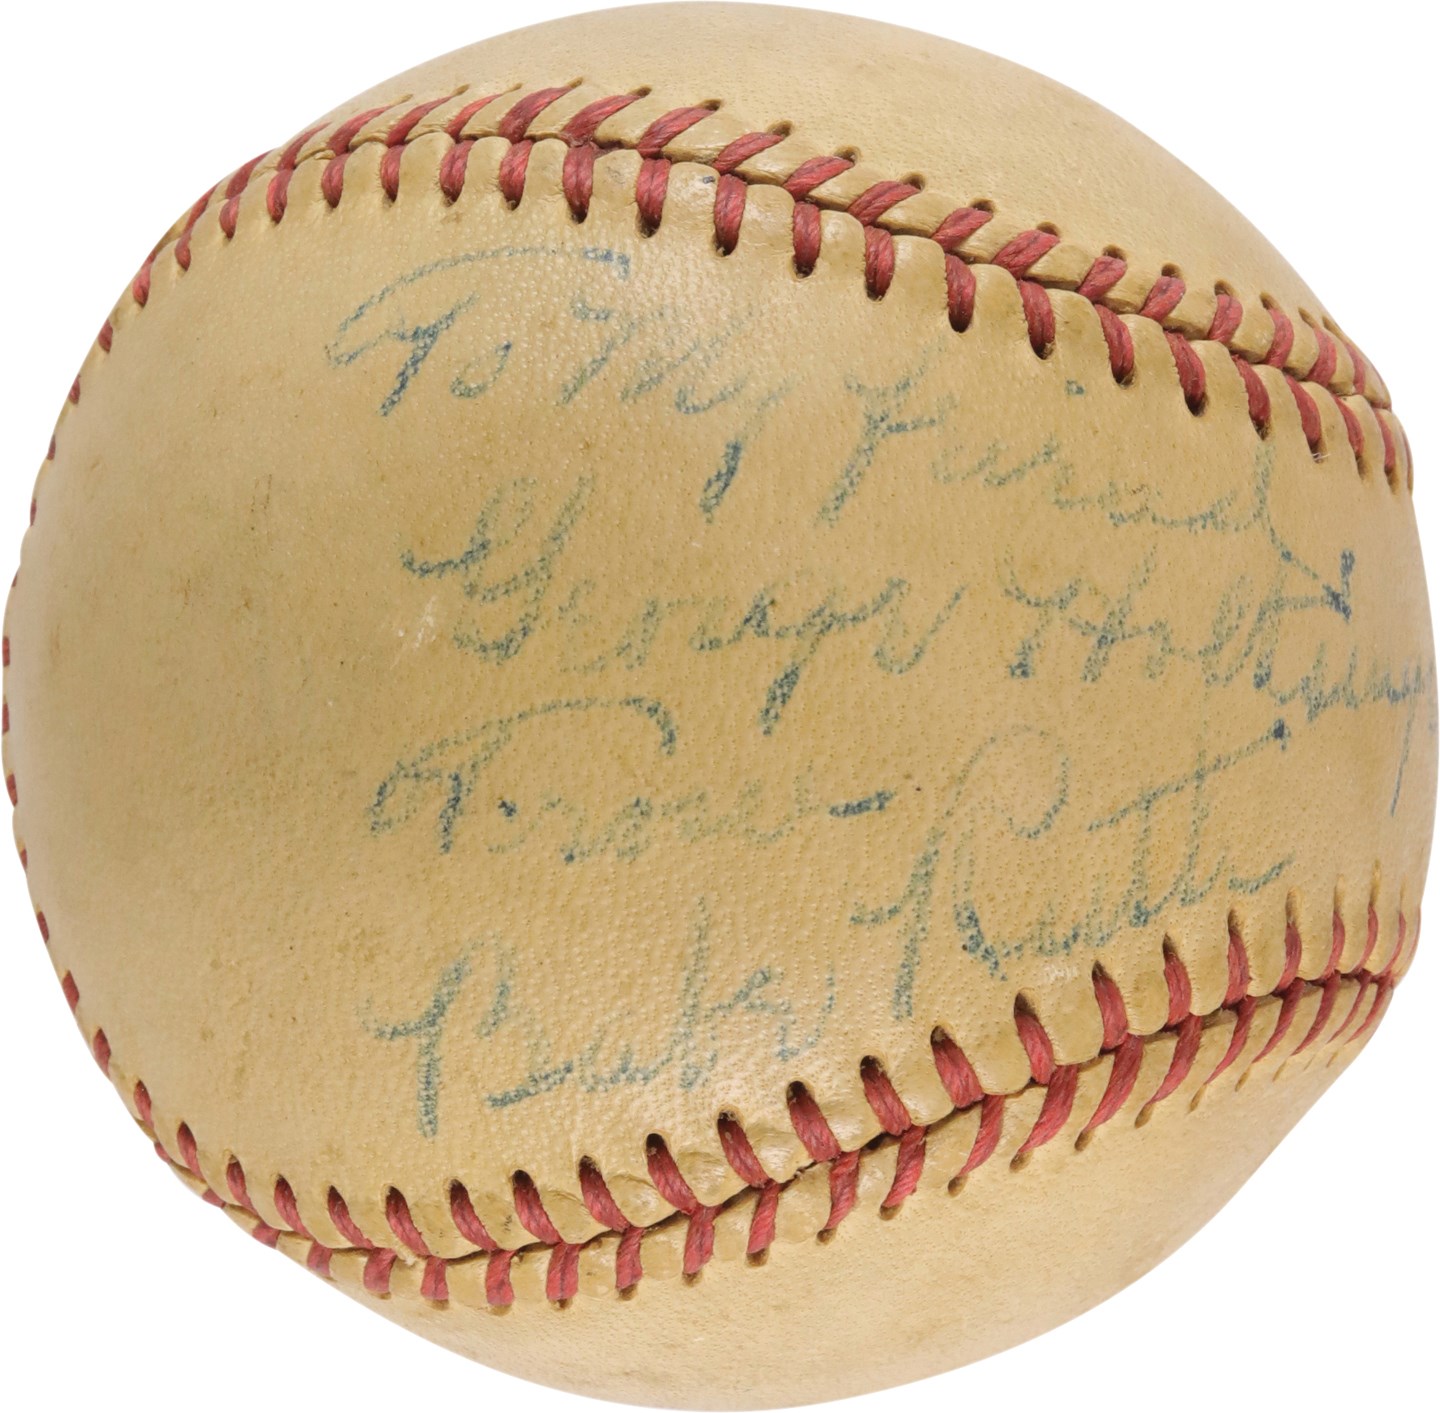 Ruth and Gehrig - 1948 Babe Ruth "To George" Single-Signed Baseball (PSA)